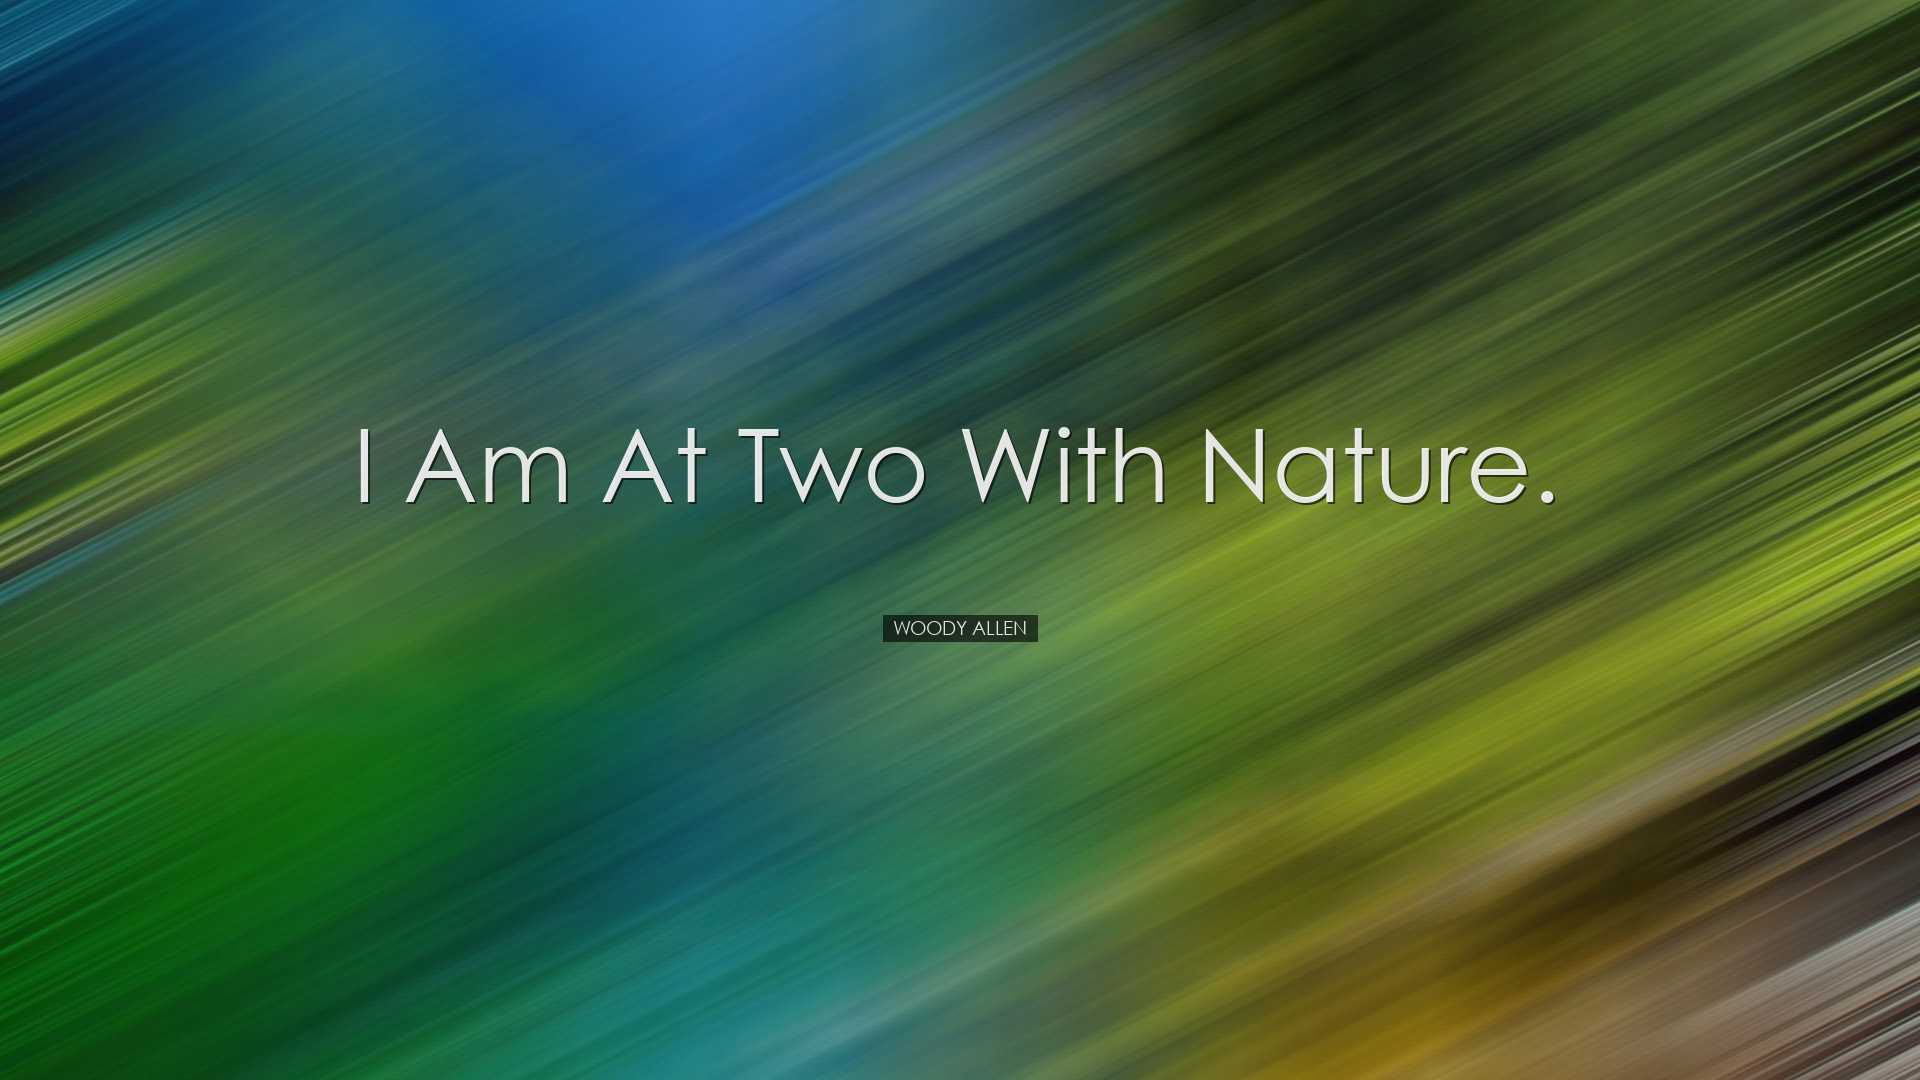 I am at two with nature. - Woody Allen